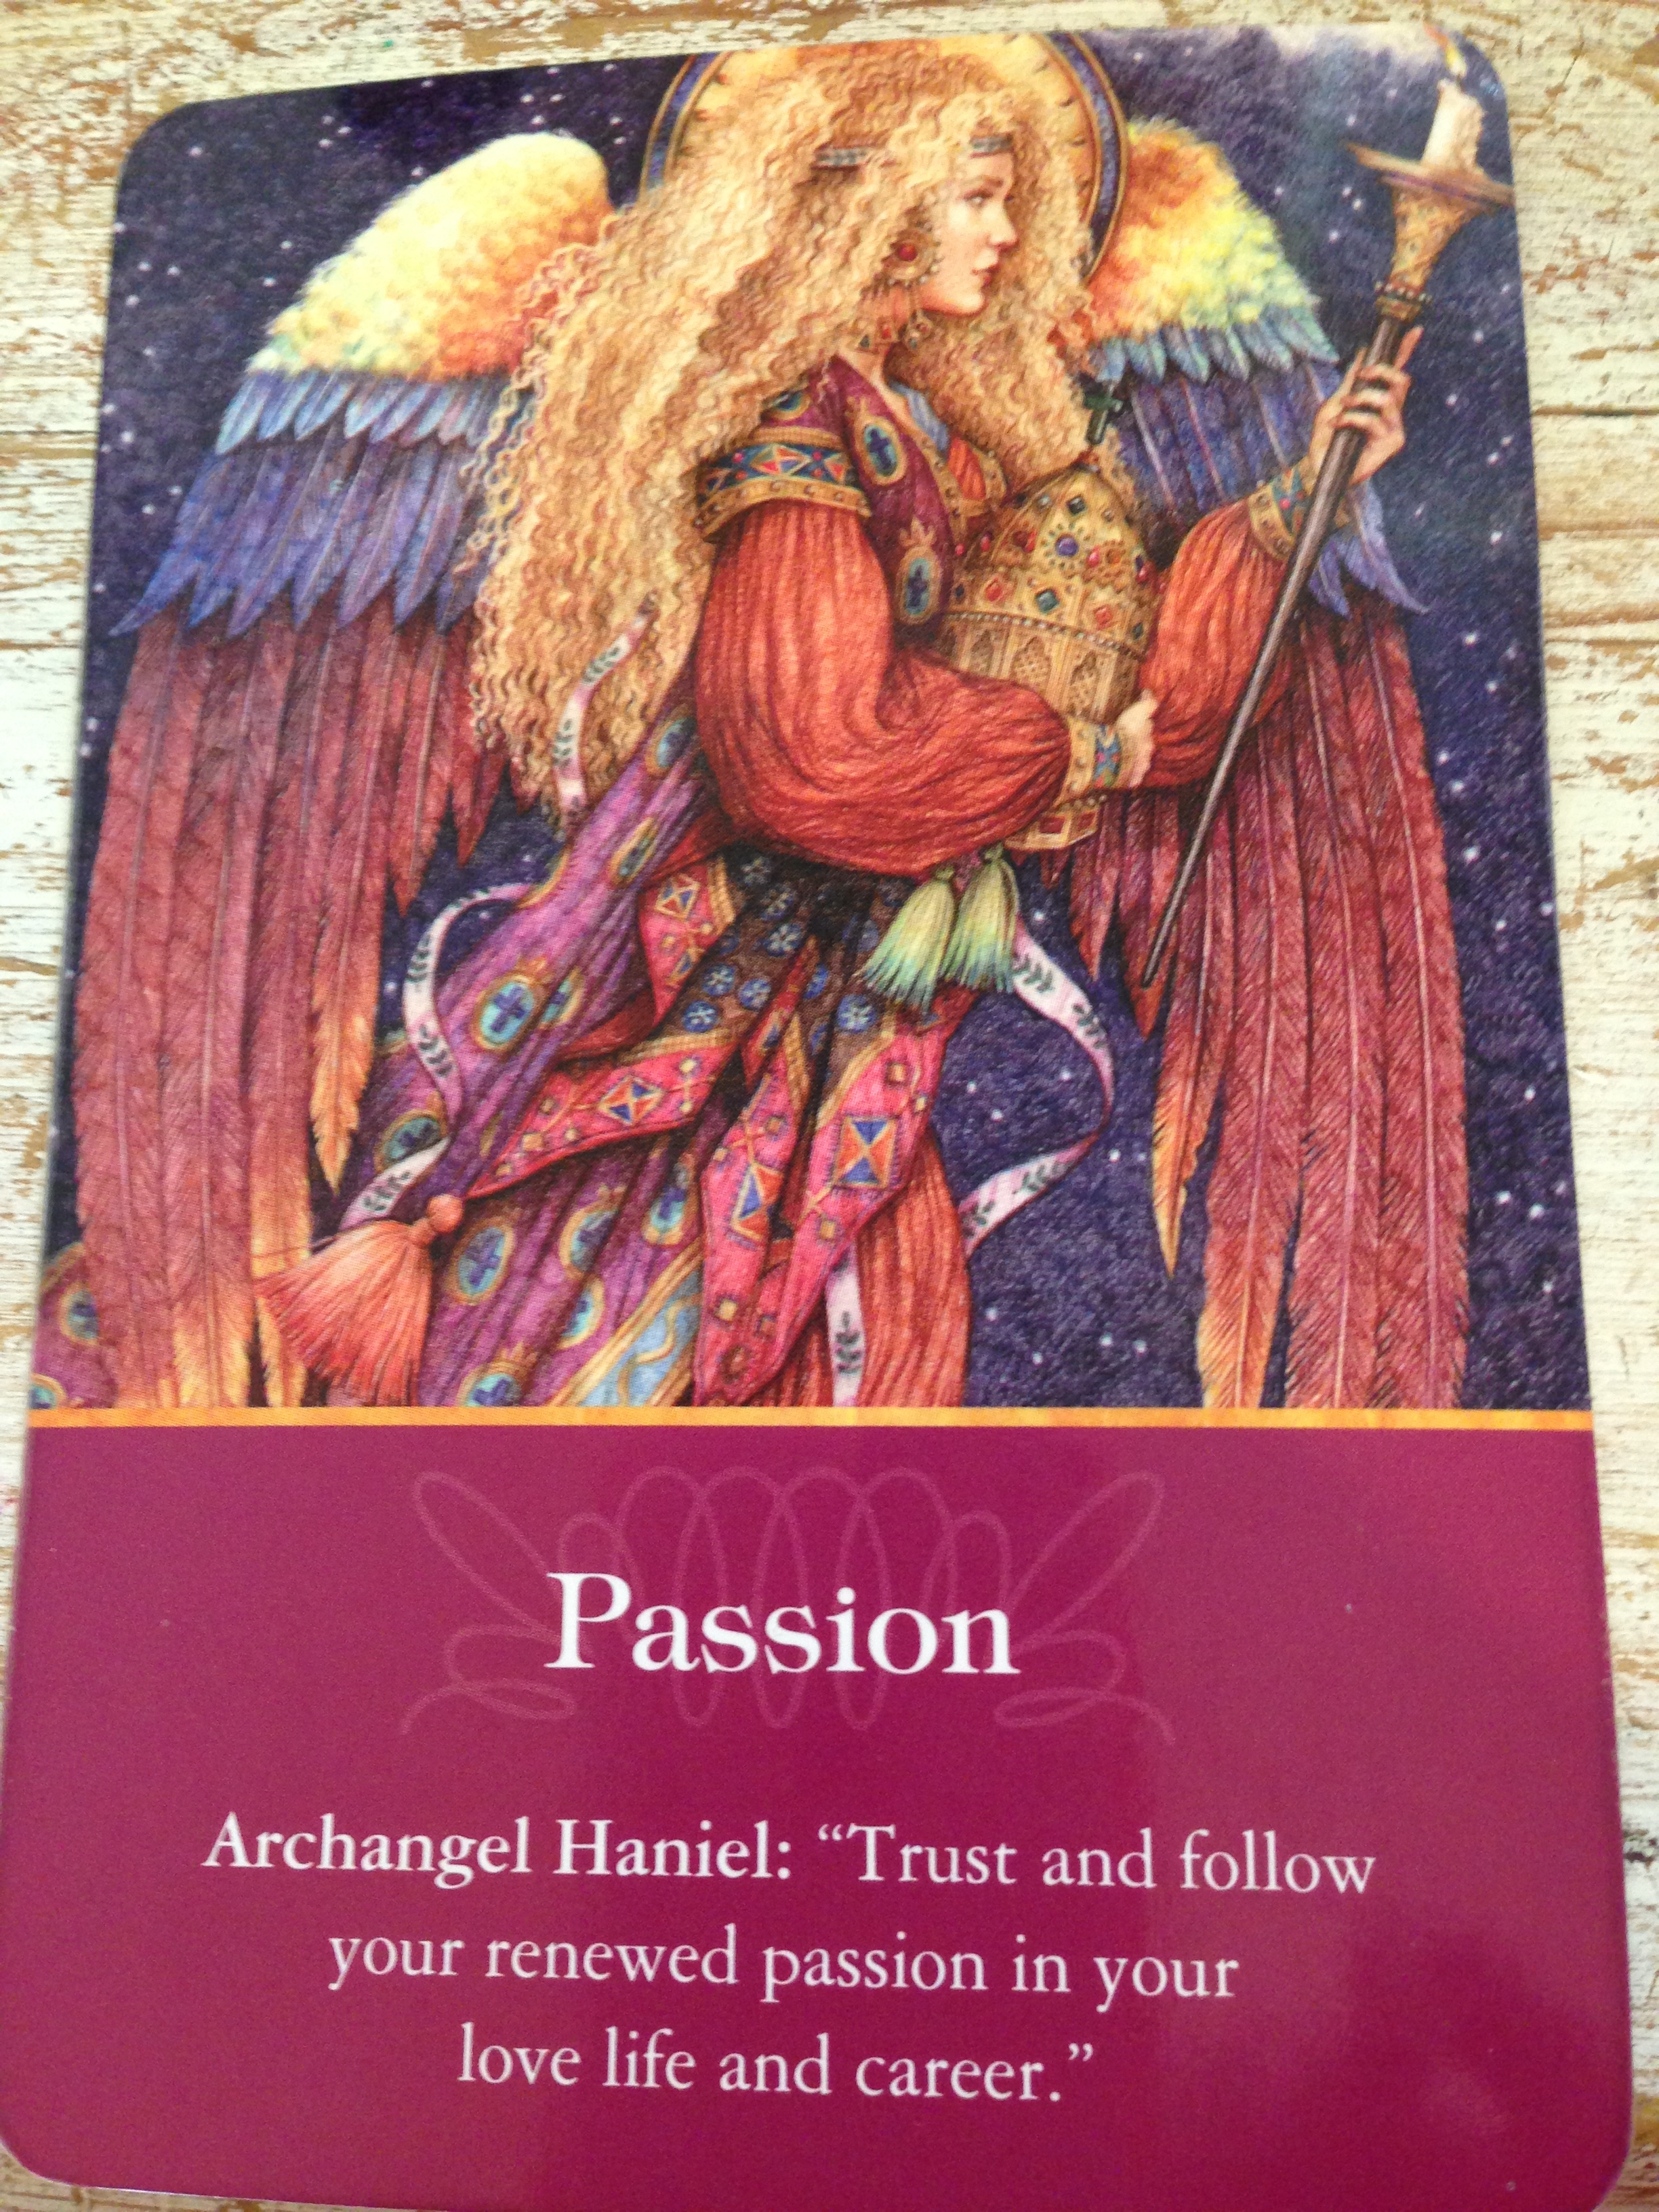 Image from Doreen Virtue Archangel Oracle Cards